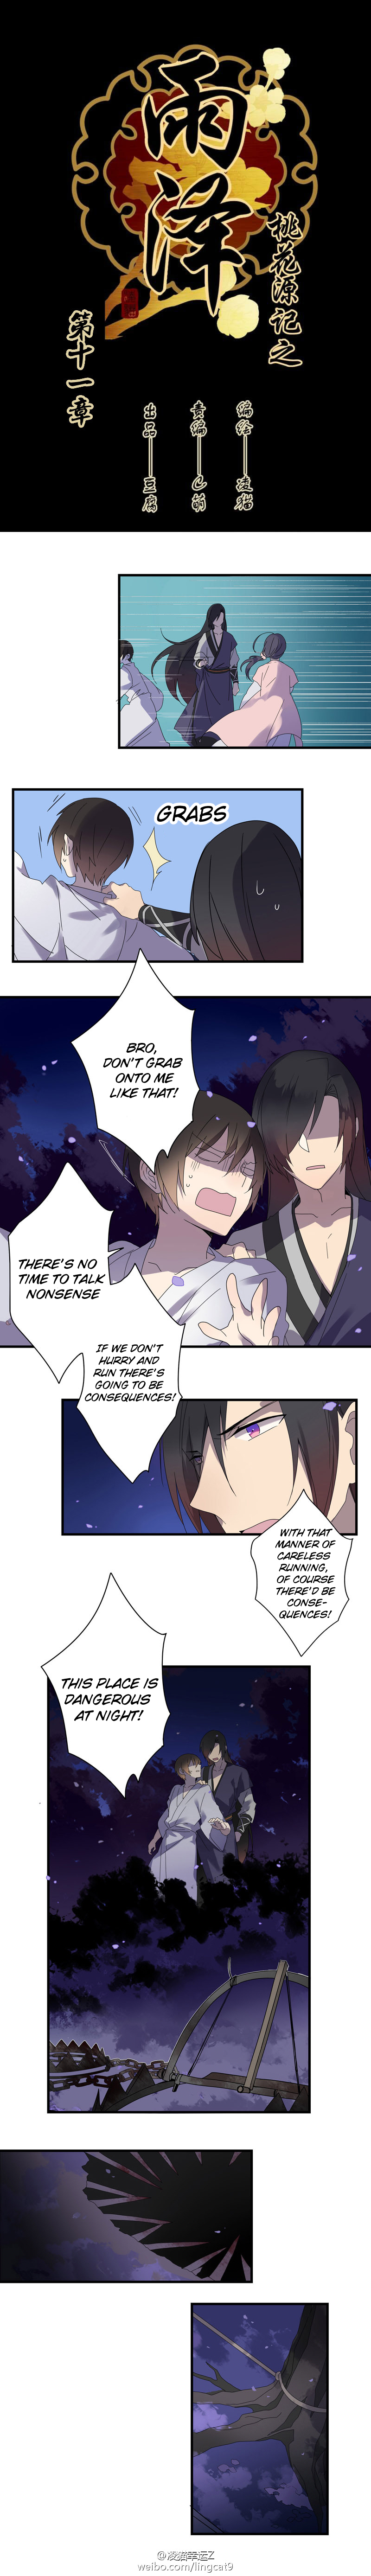 Yuze Of The Peach Blossom Springs - Page 1